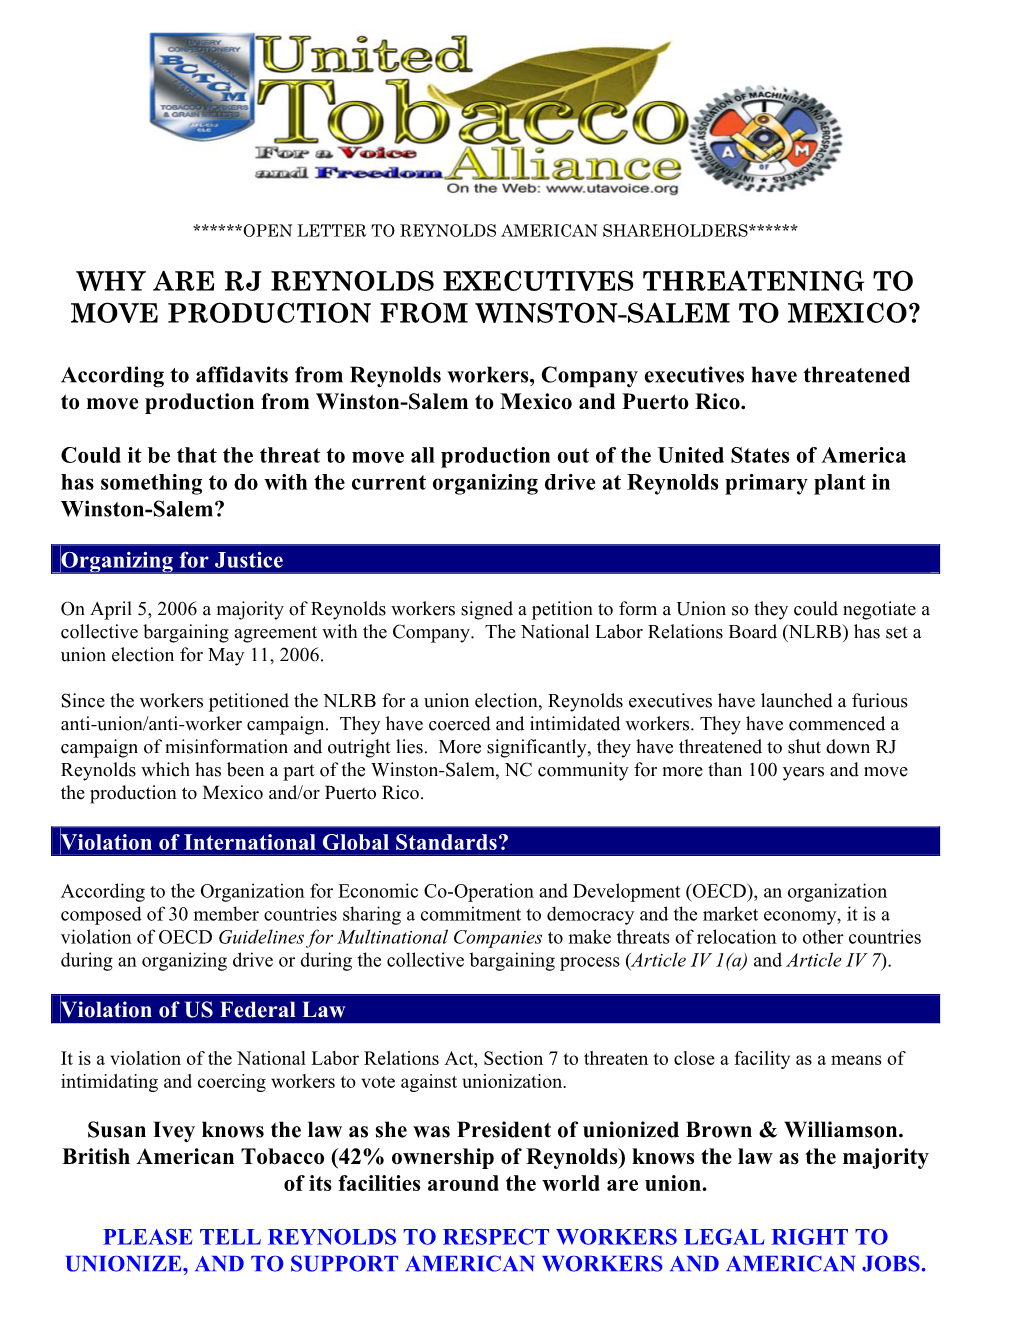 Why Are Rj Reynolds Executives Threatening to Move Production from Winston-Salem to Mexico?